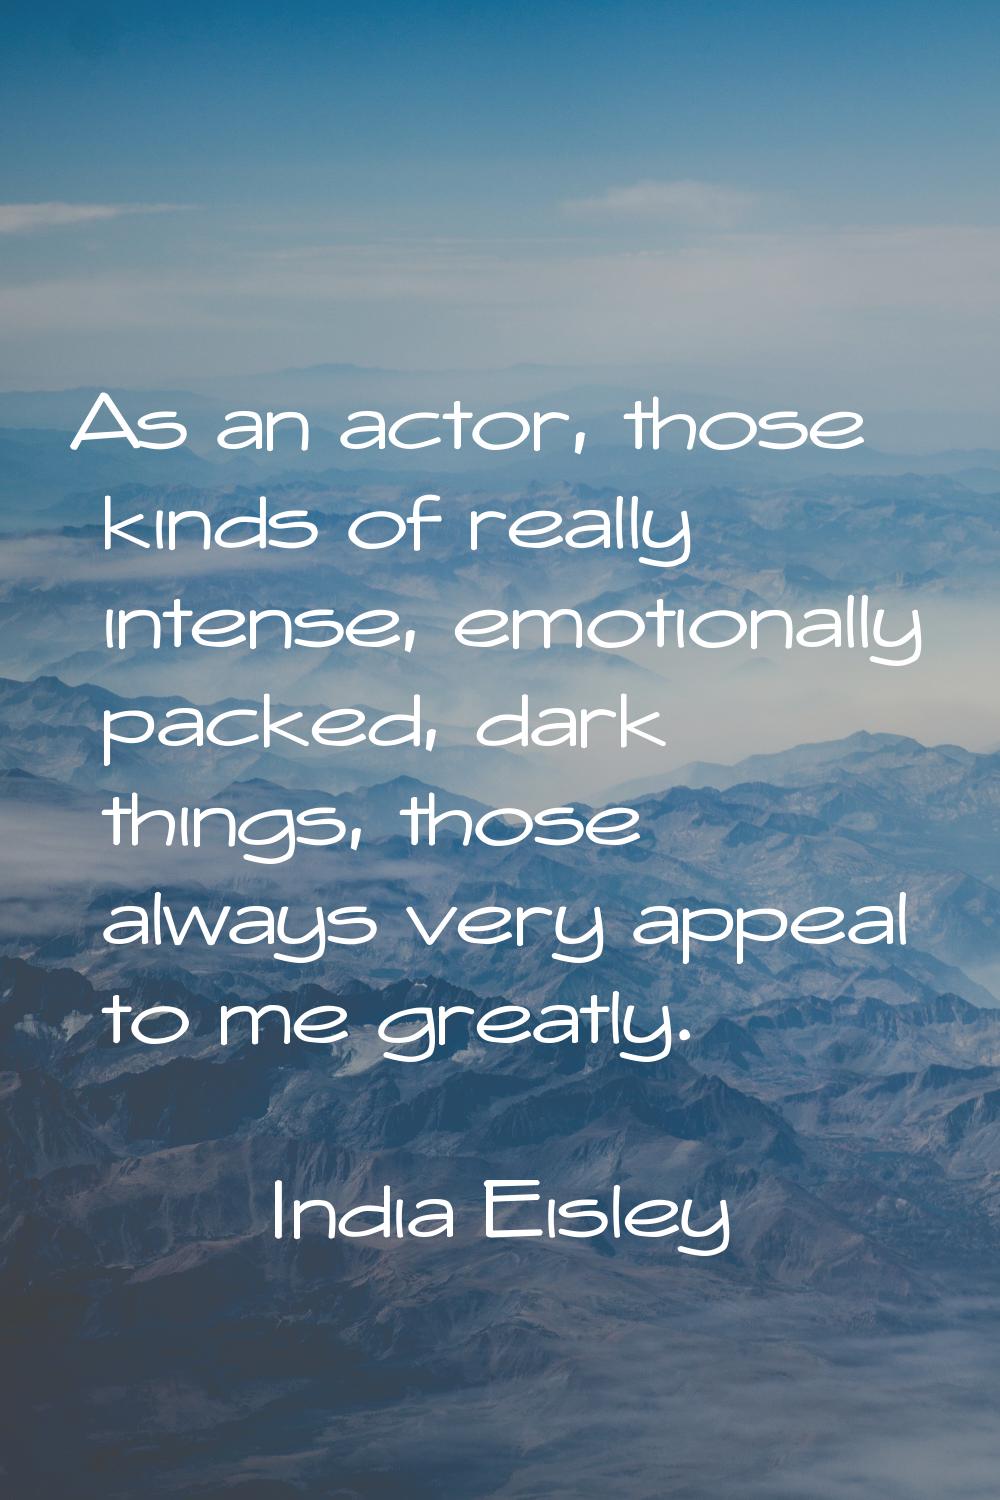 As an actor, those kinds of really intense, emotionally packed, dark things, those always very appe